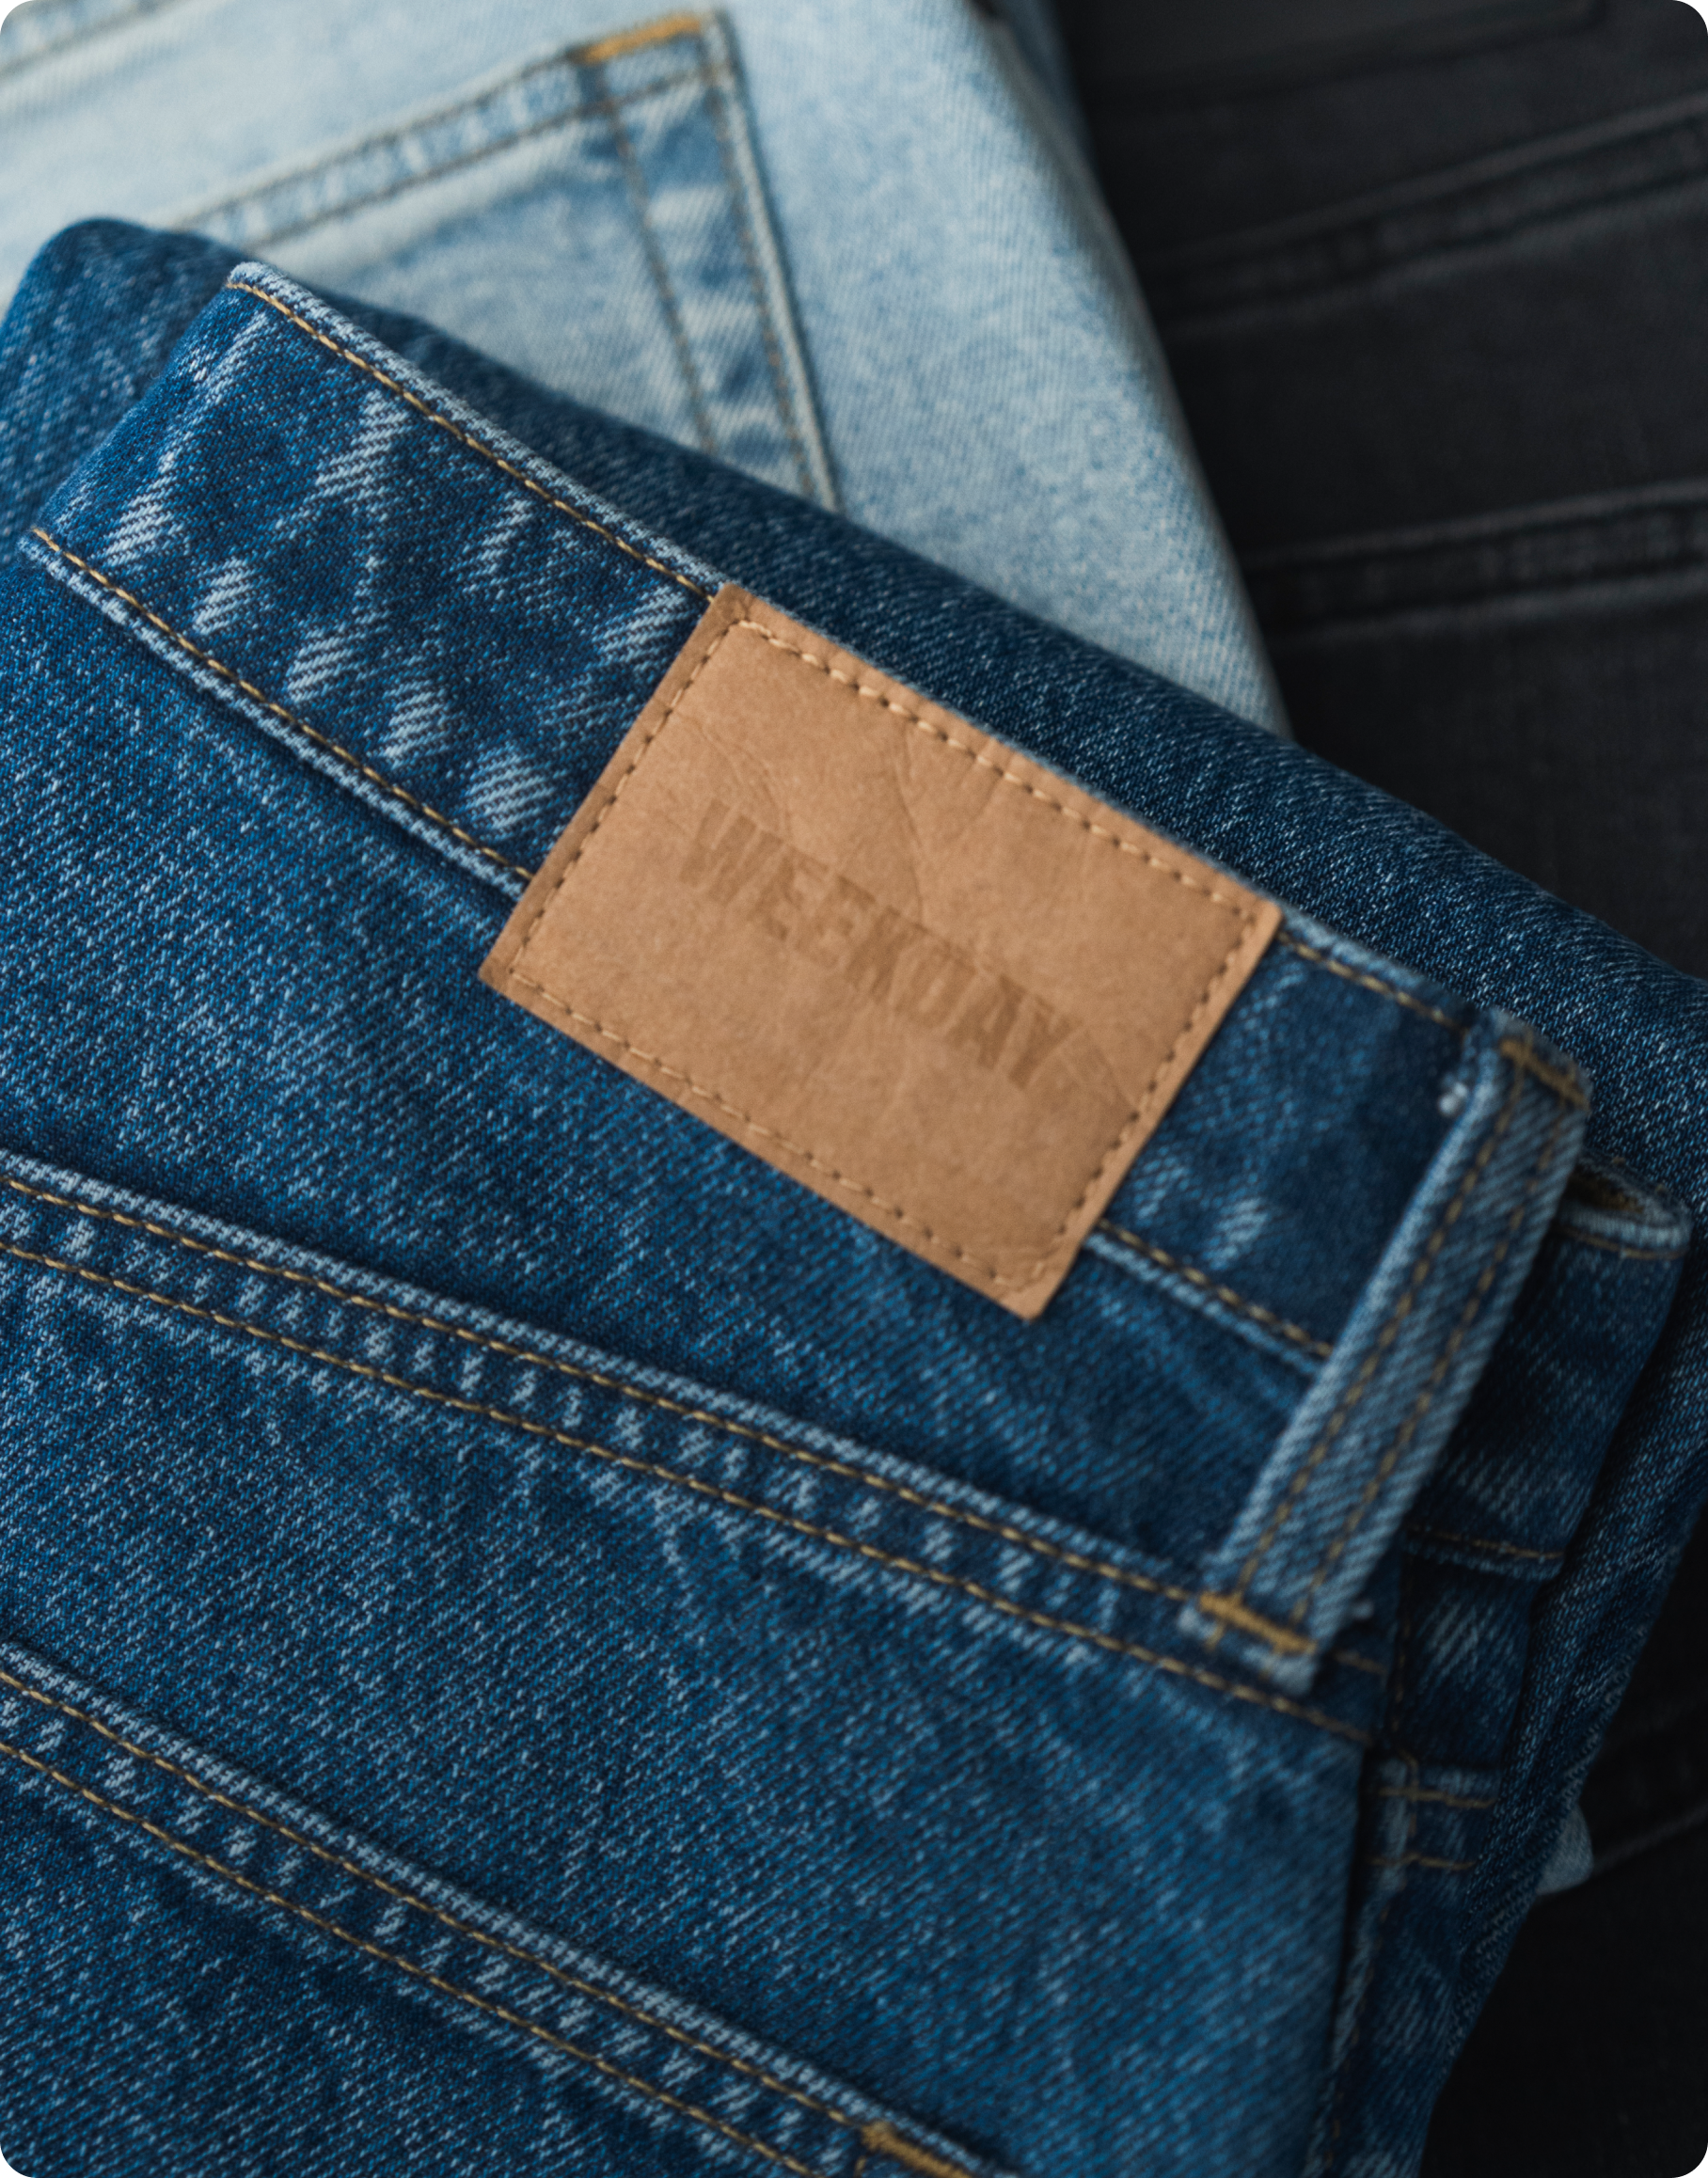 Like the fabric type, rise, and length, the trims of a pair of Body Scan Jeans were customizable, with different colorways available for the fabric, stitching, back patch, button, and rivets.